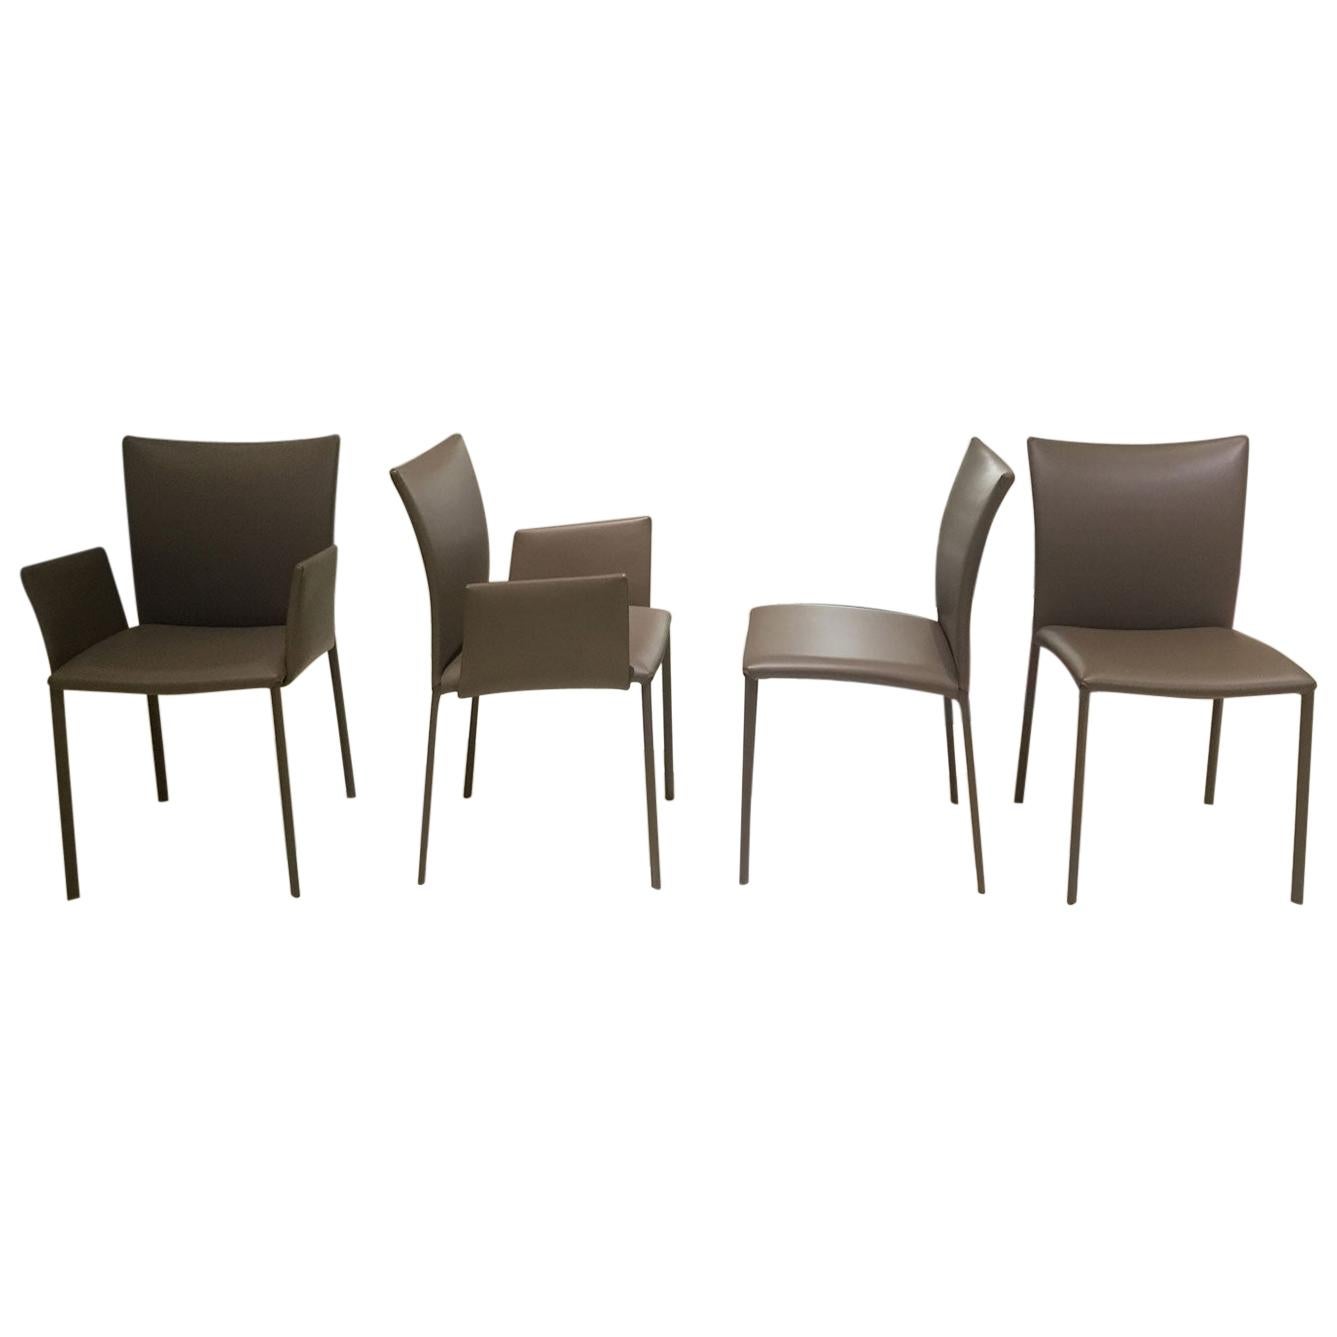 Set of 4 Contemporary Armchair and Armless Beige Brown Leather Dining Chairs